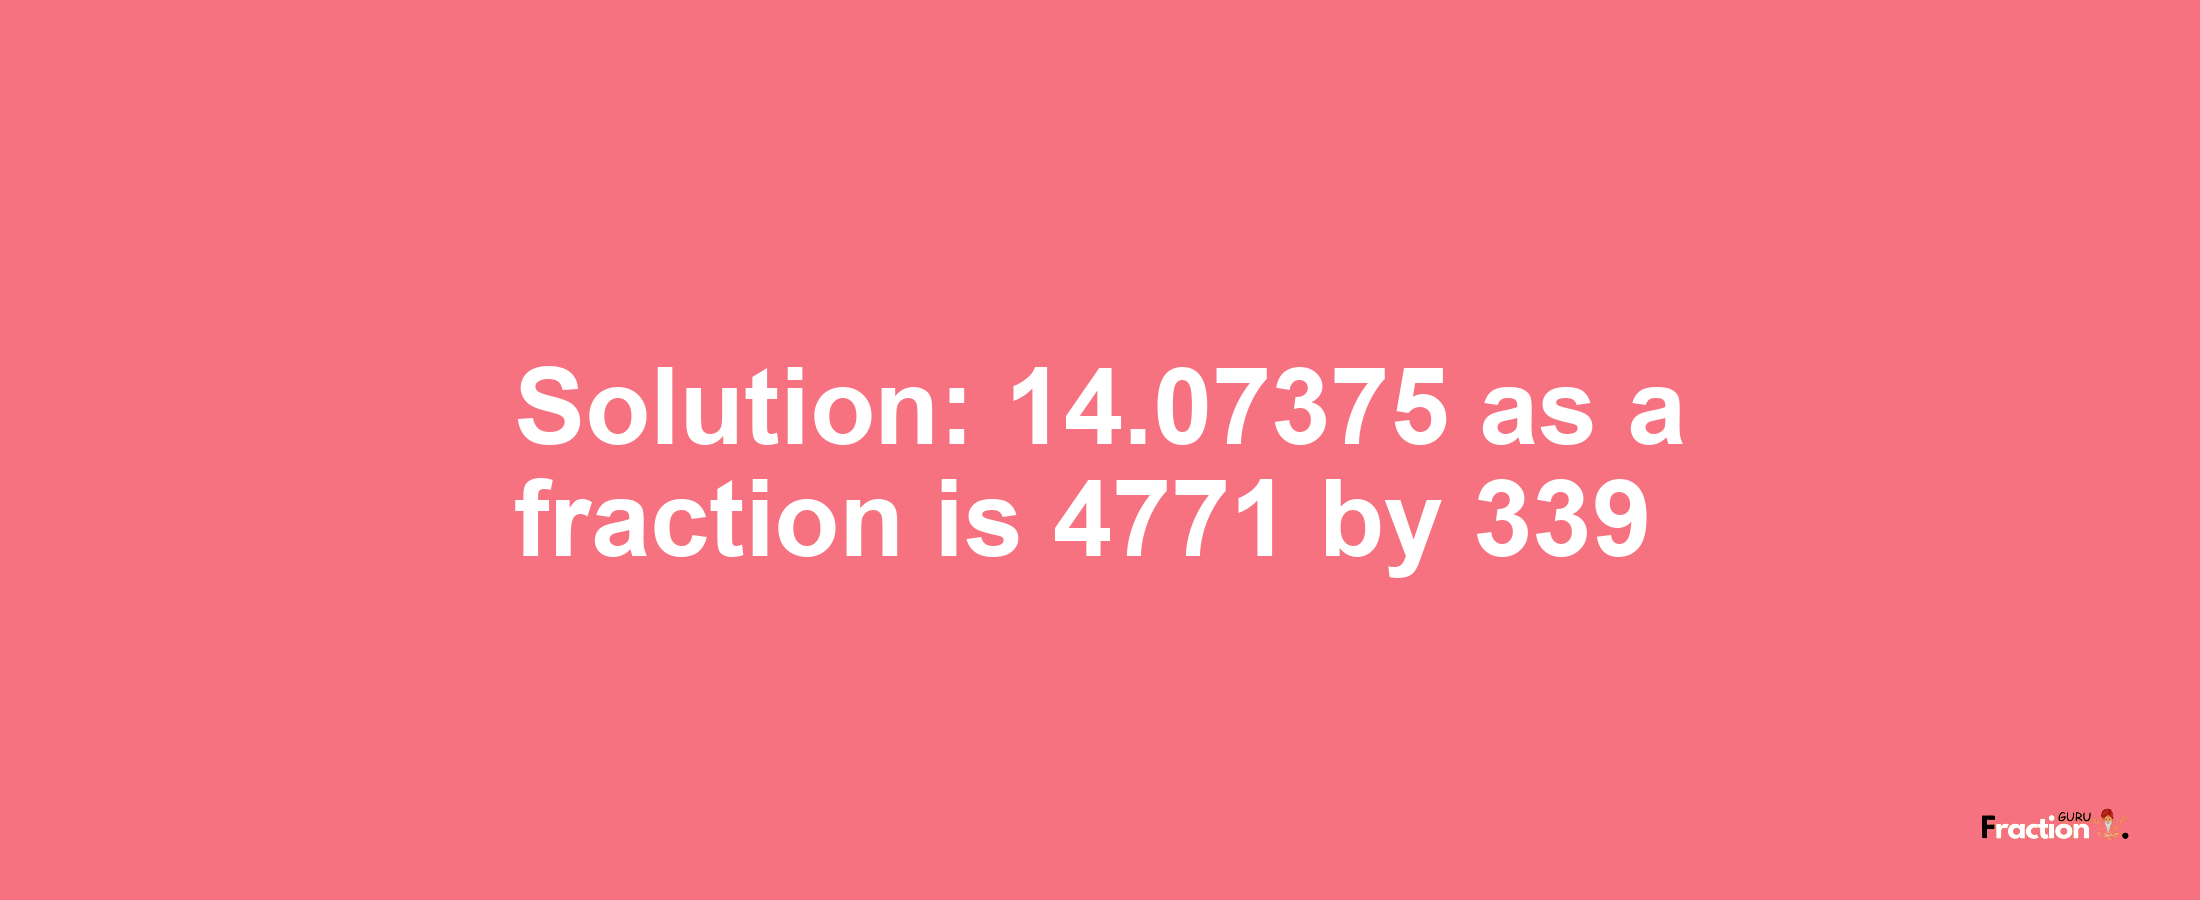 Solution:14.07375 as a fraction is 4771/339